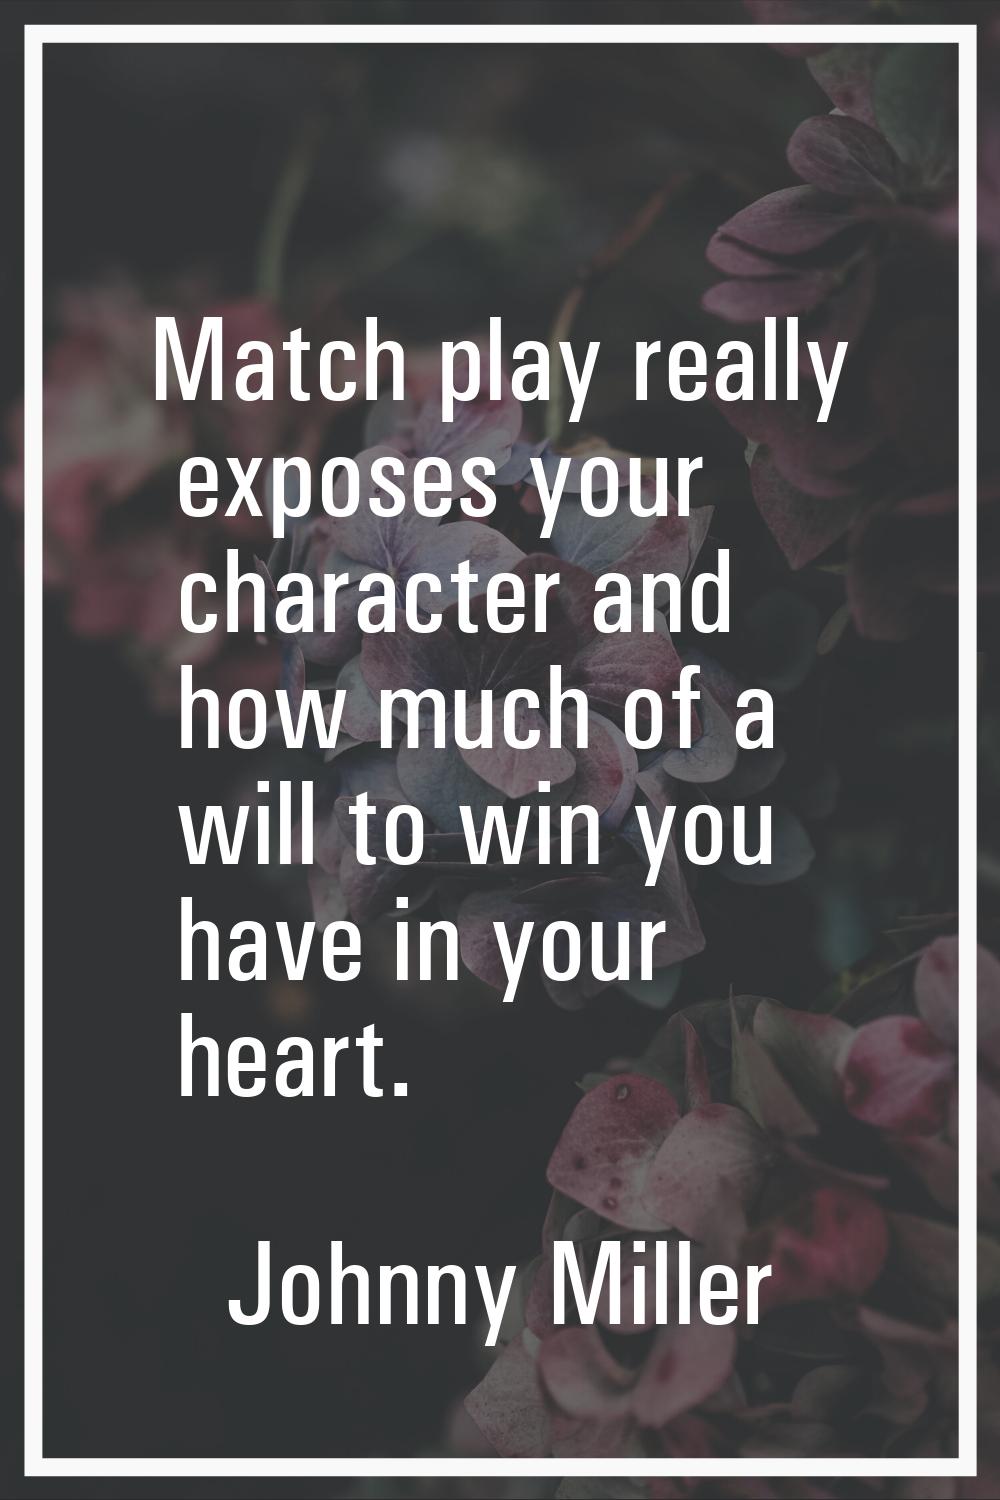 Match play really exposes your character and how much of a will to win you have in your heart.